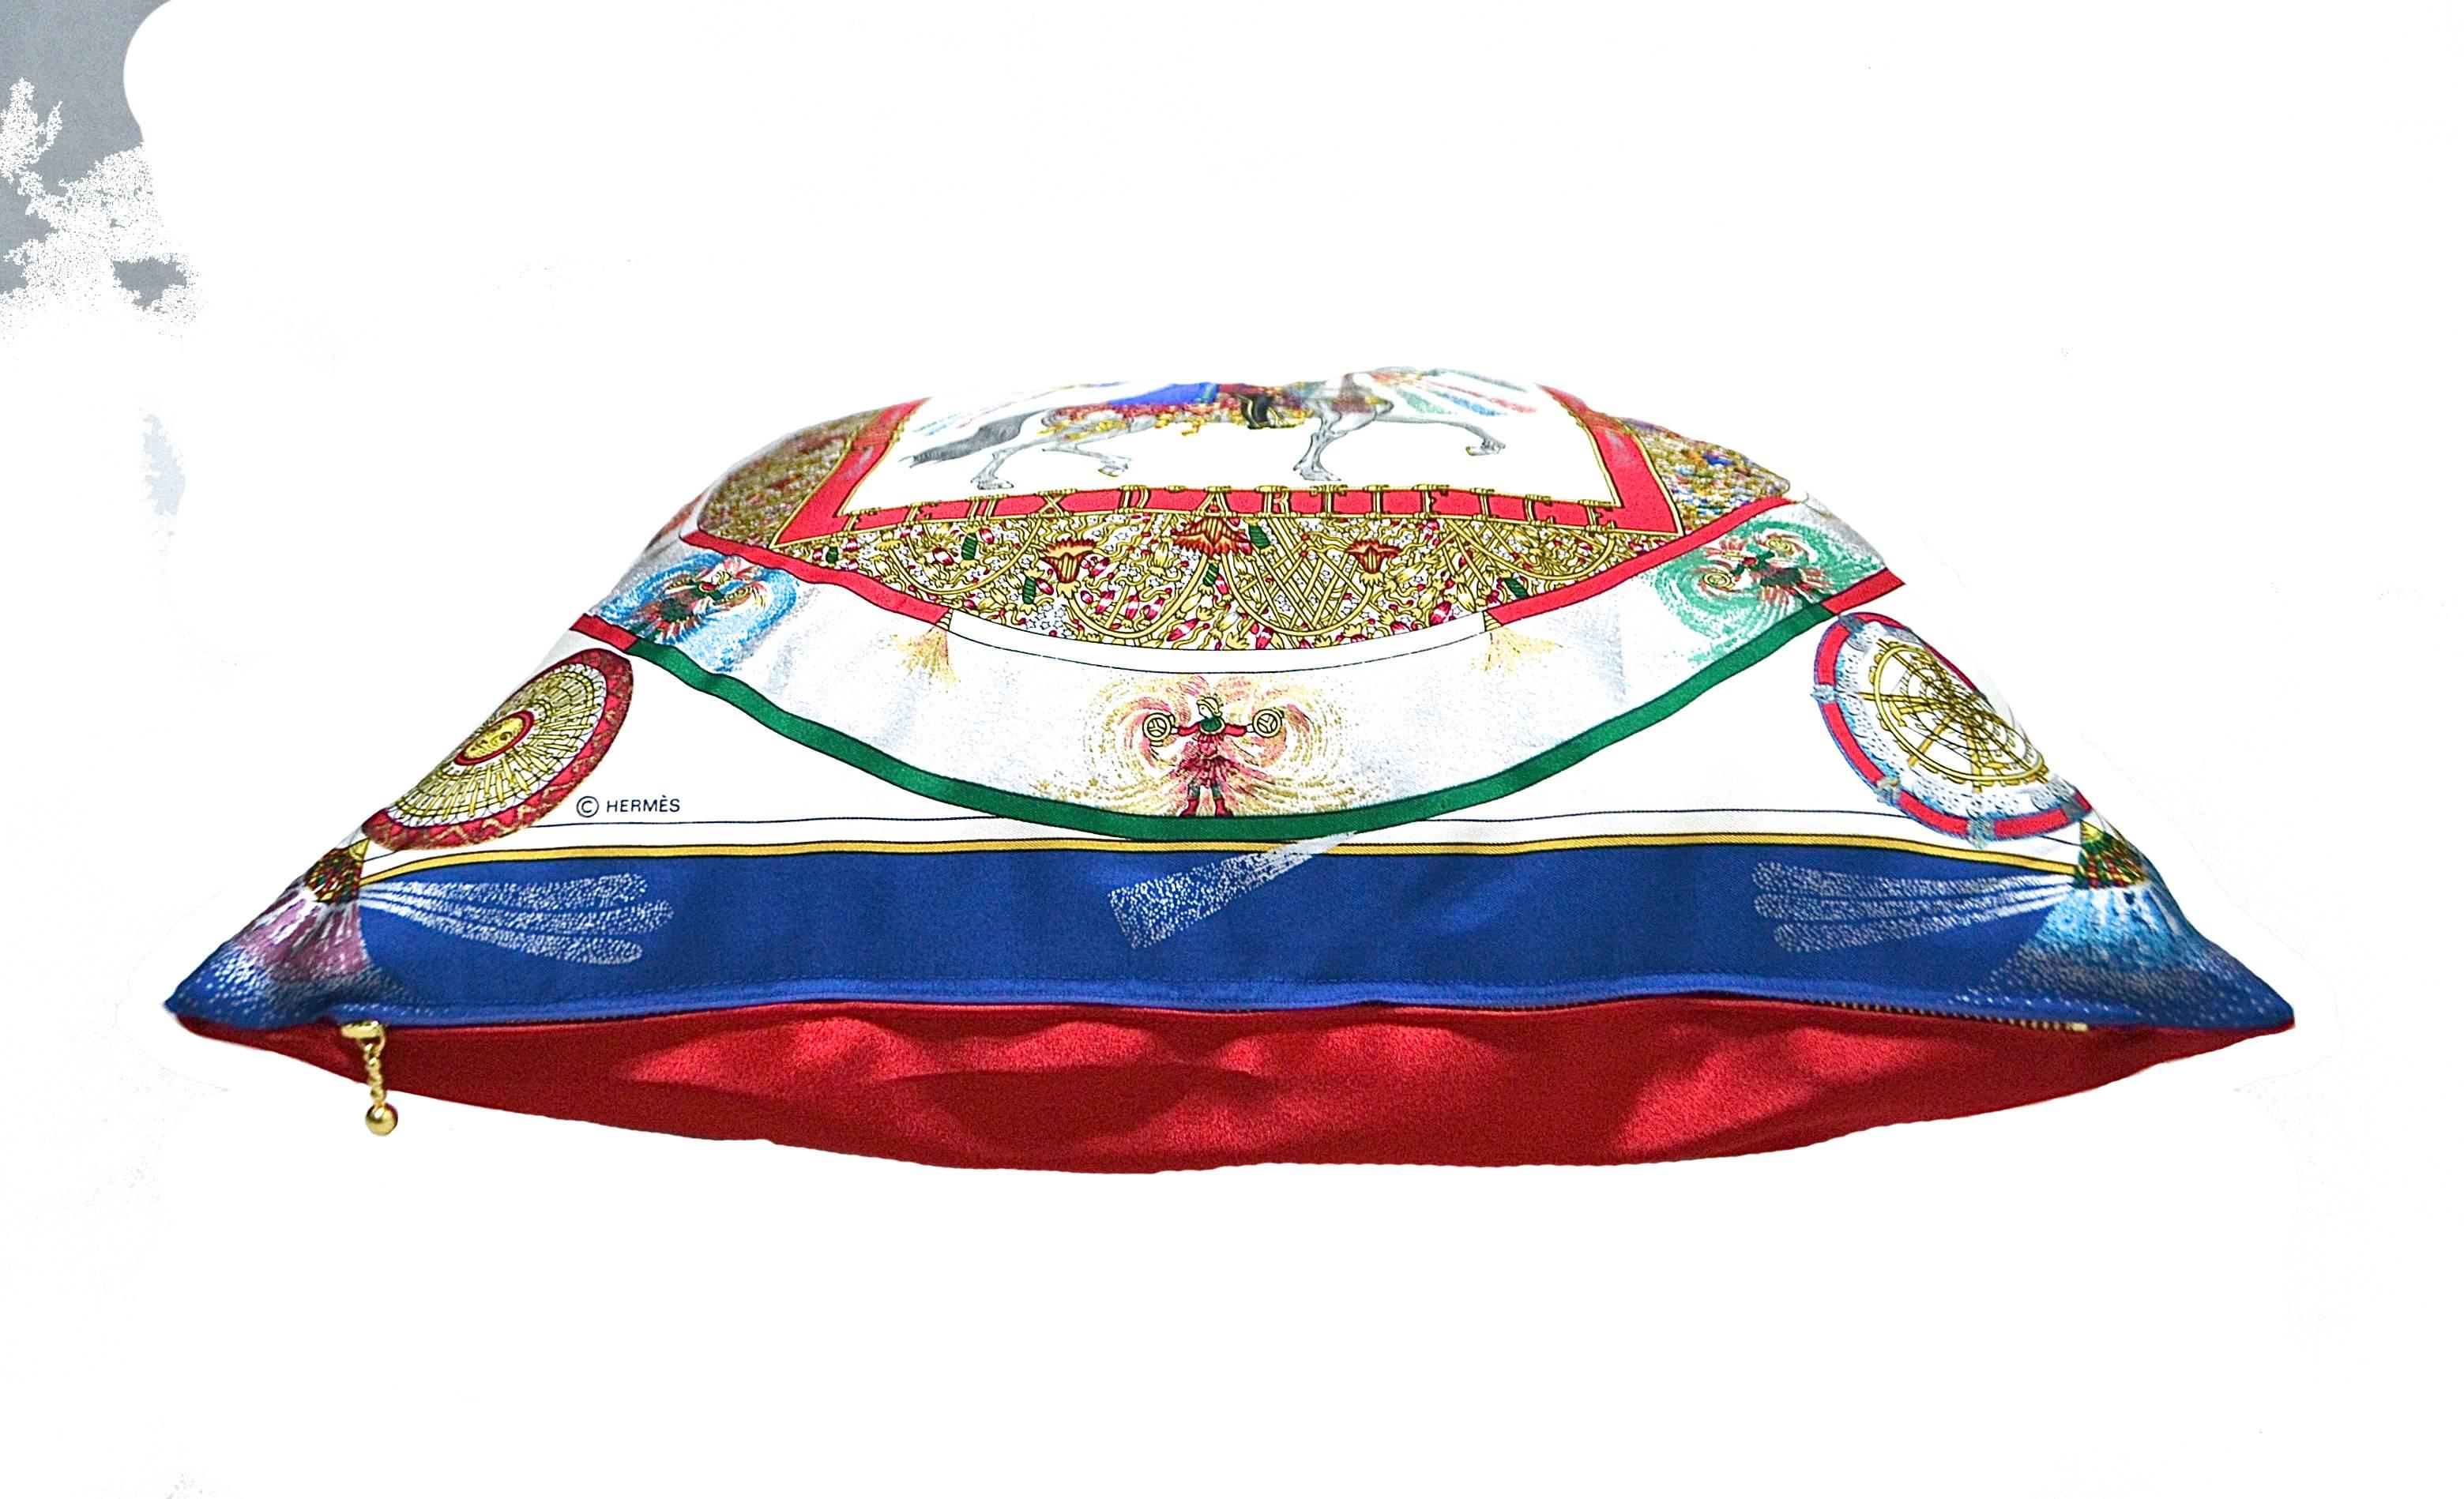 Made exclusively for iwatchjapan by Rita-Mari Couture. This elegant Hermes scarf pillow uses the highest quality items. This piece is entirely made in Japan and manufactured in an artisanal way, in which every step of the process is carefully